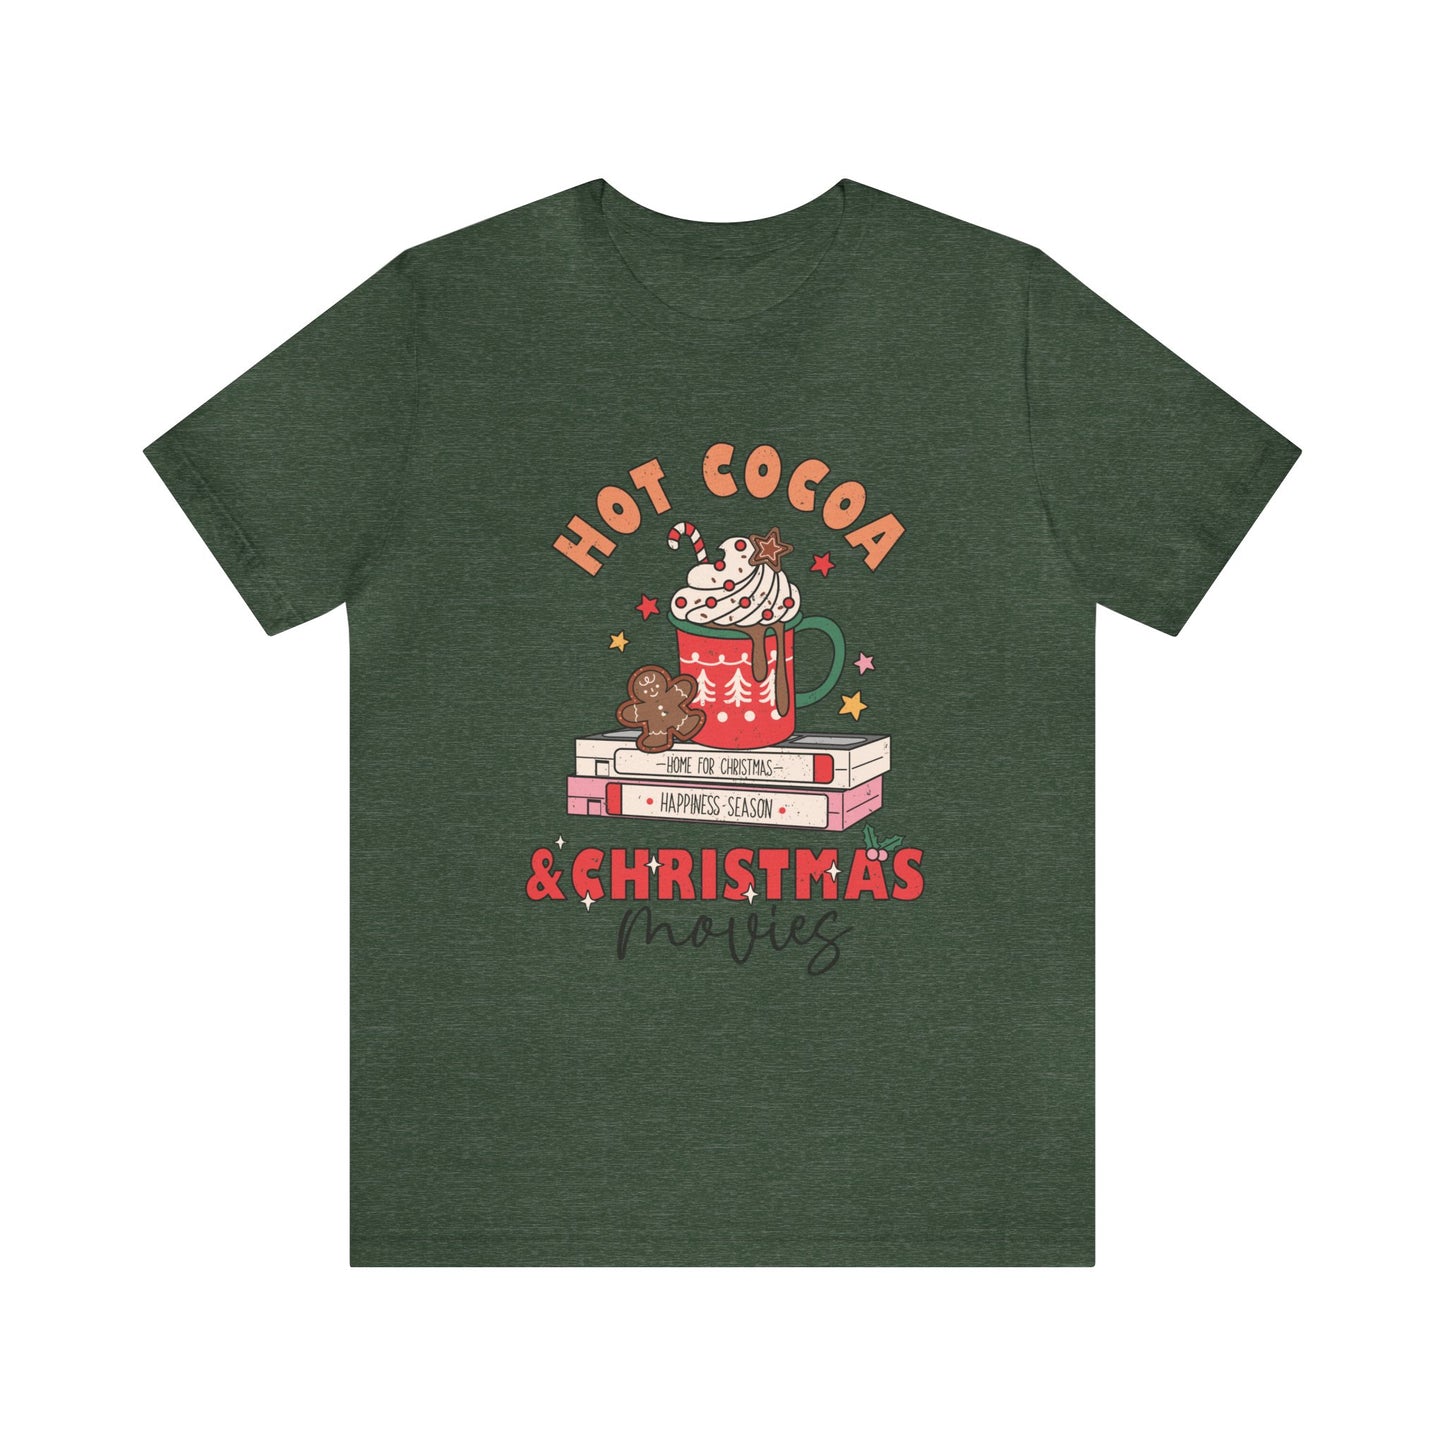 Hot Cocoa and Christmas Movies Women's Short Sleeve Christmas T Shirt